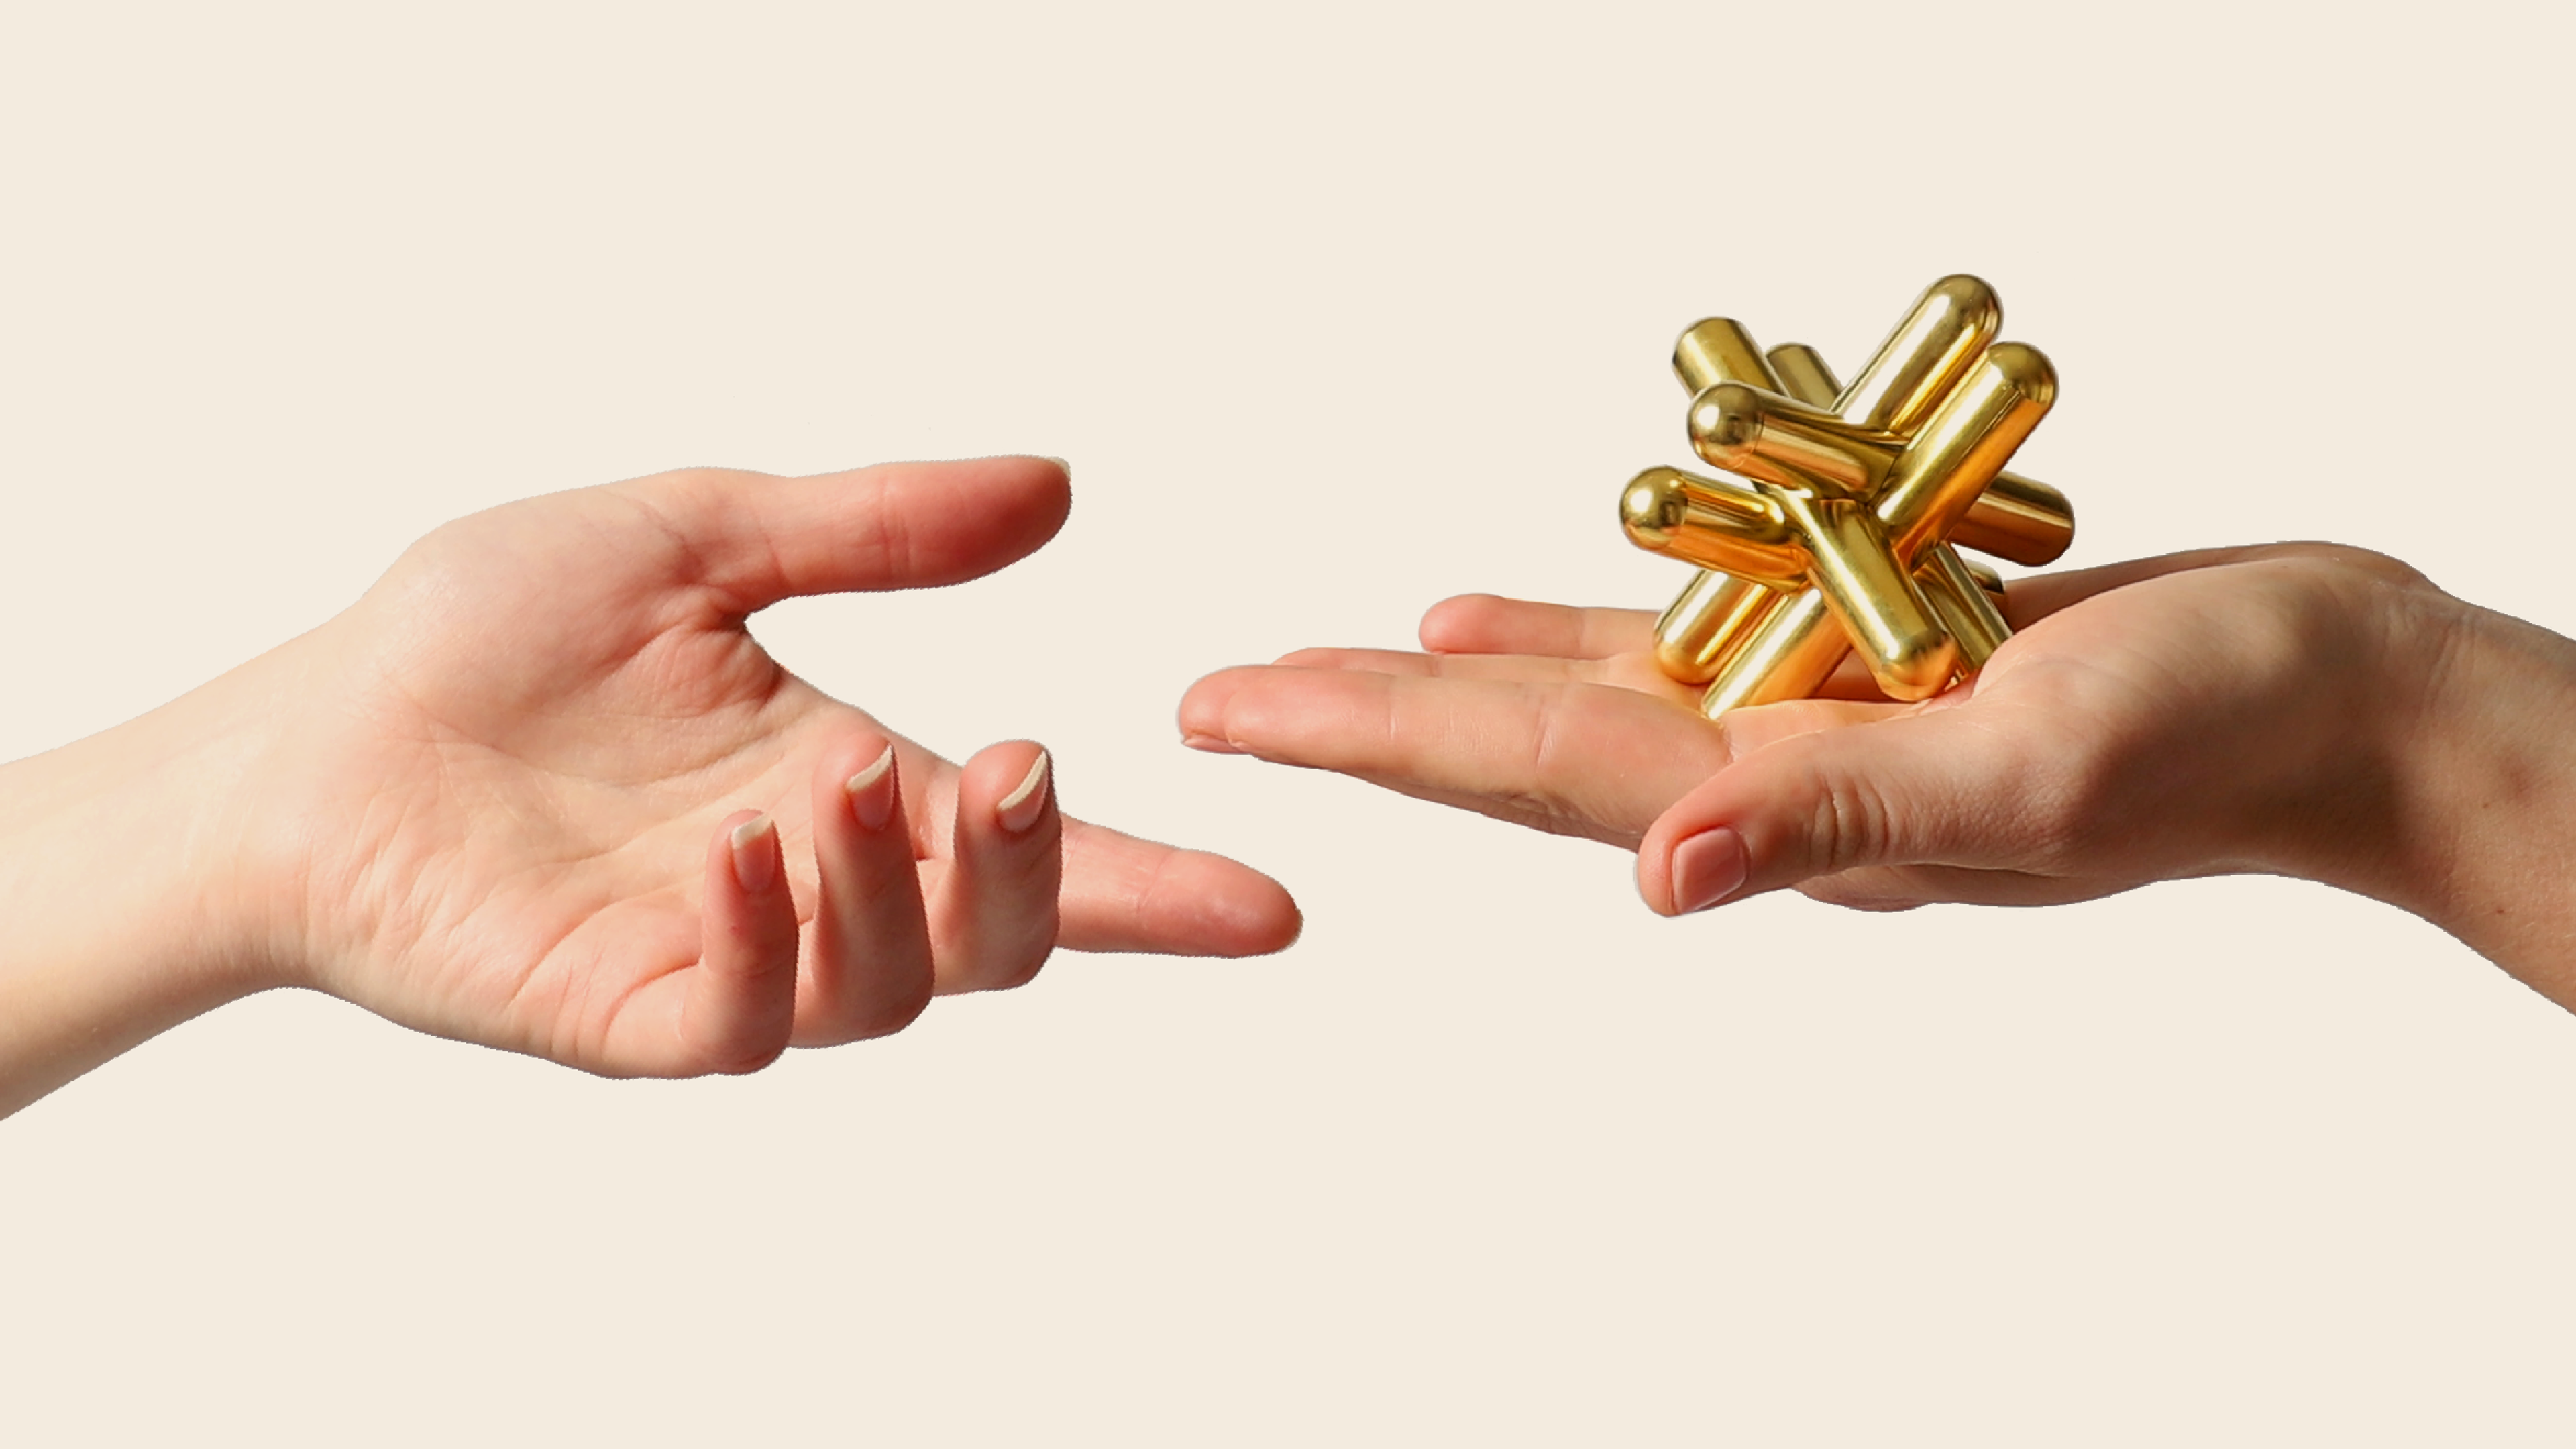 Why investing in gifting is good for your bottom line